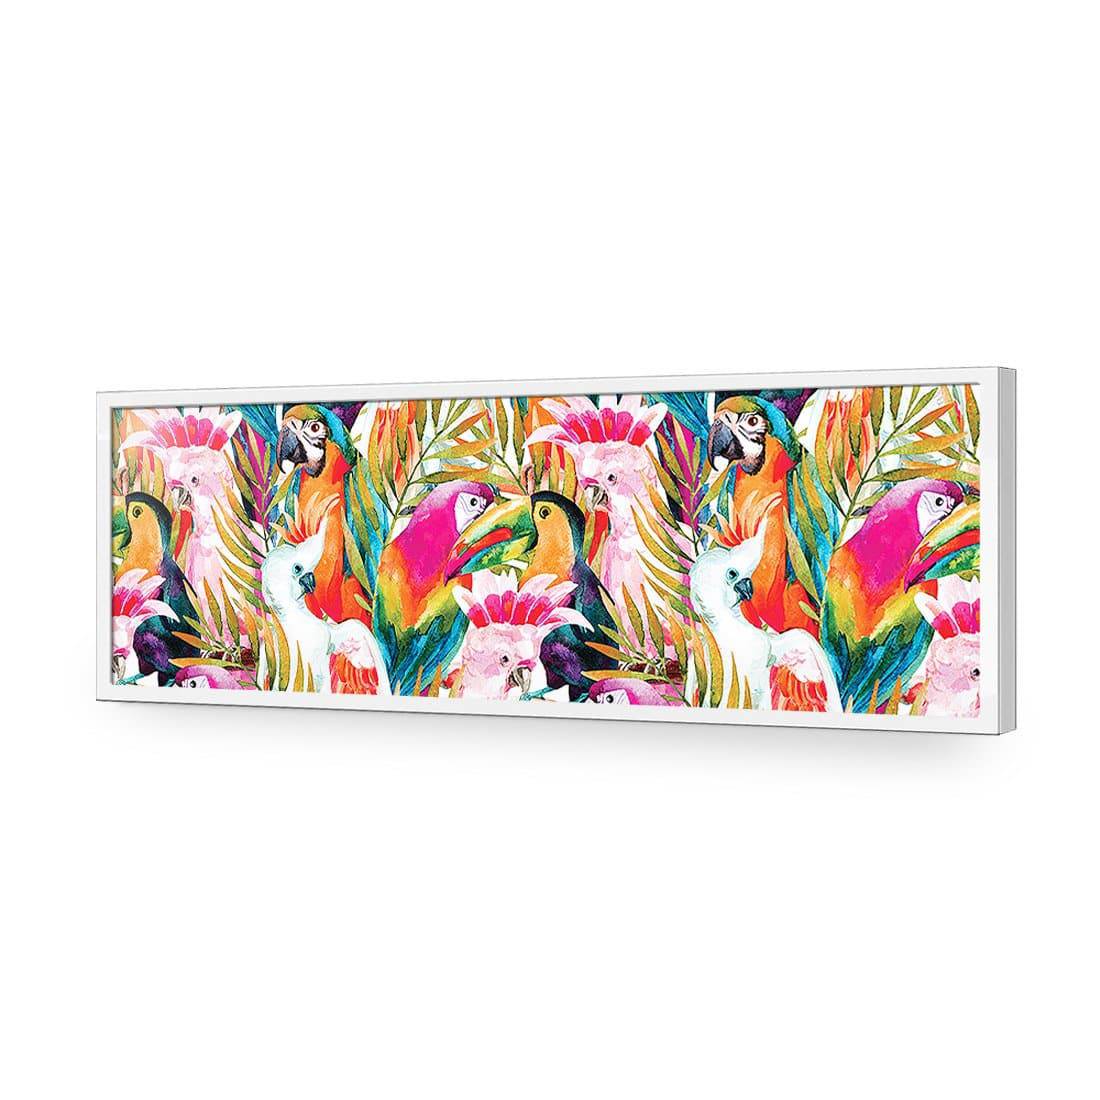 Parrots & Palms, Long-Acrylic-Wall Art Design-Without Border-Acrylic - White Frame-60x20cm-Wall Art Designs